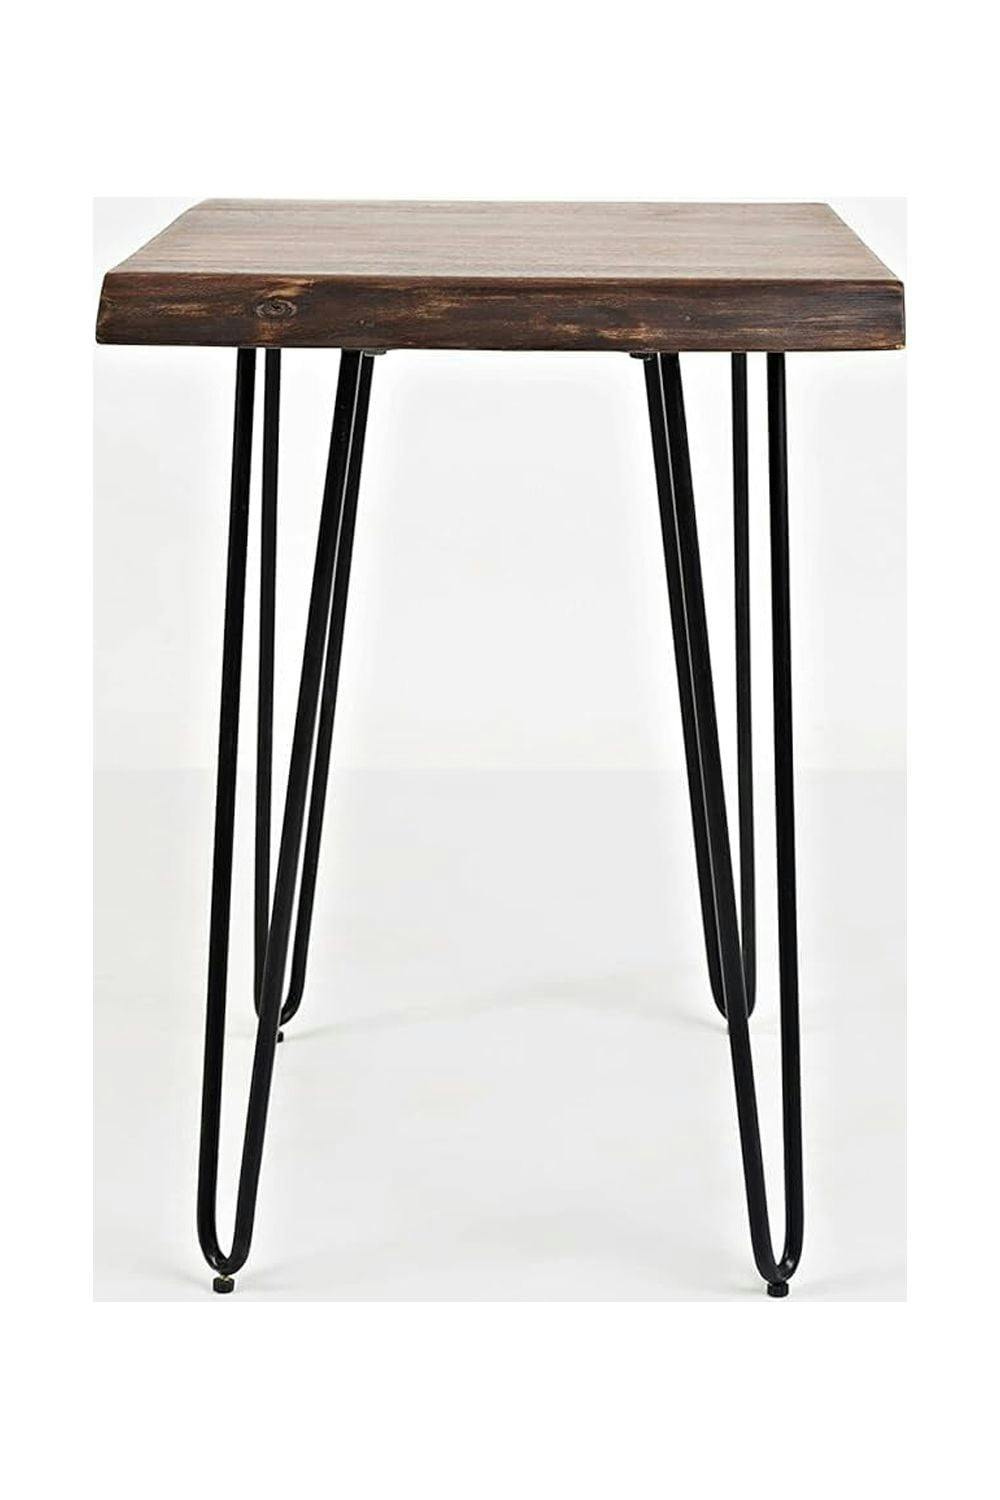 Transitional Chestnut Solid Wood and Metal Chairside Table